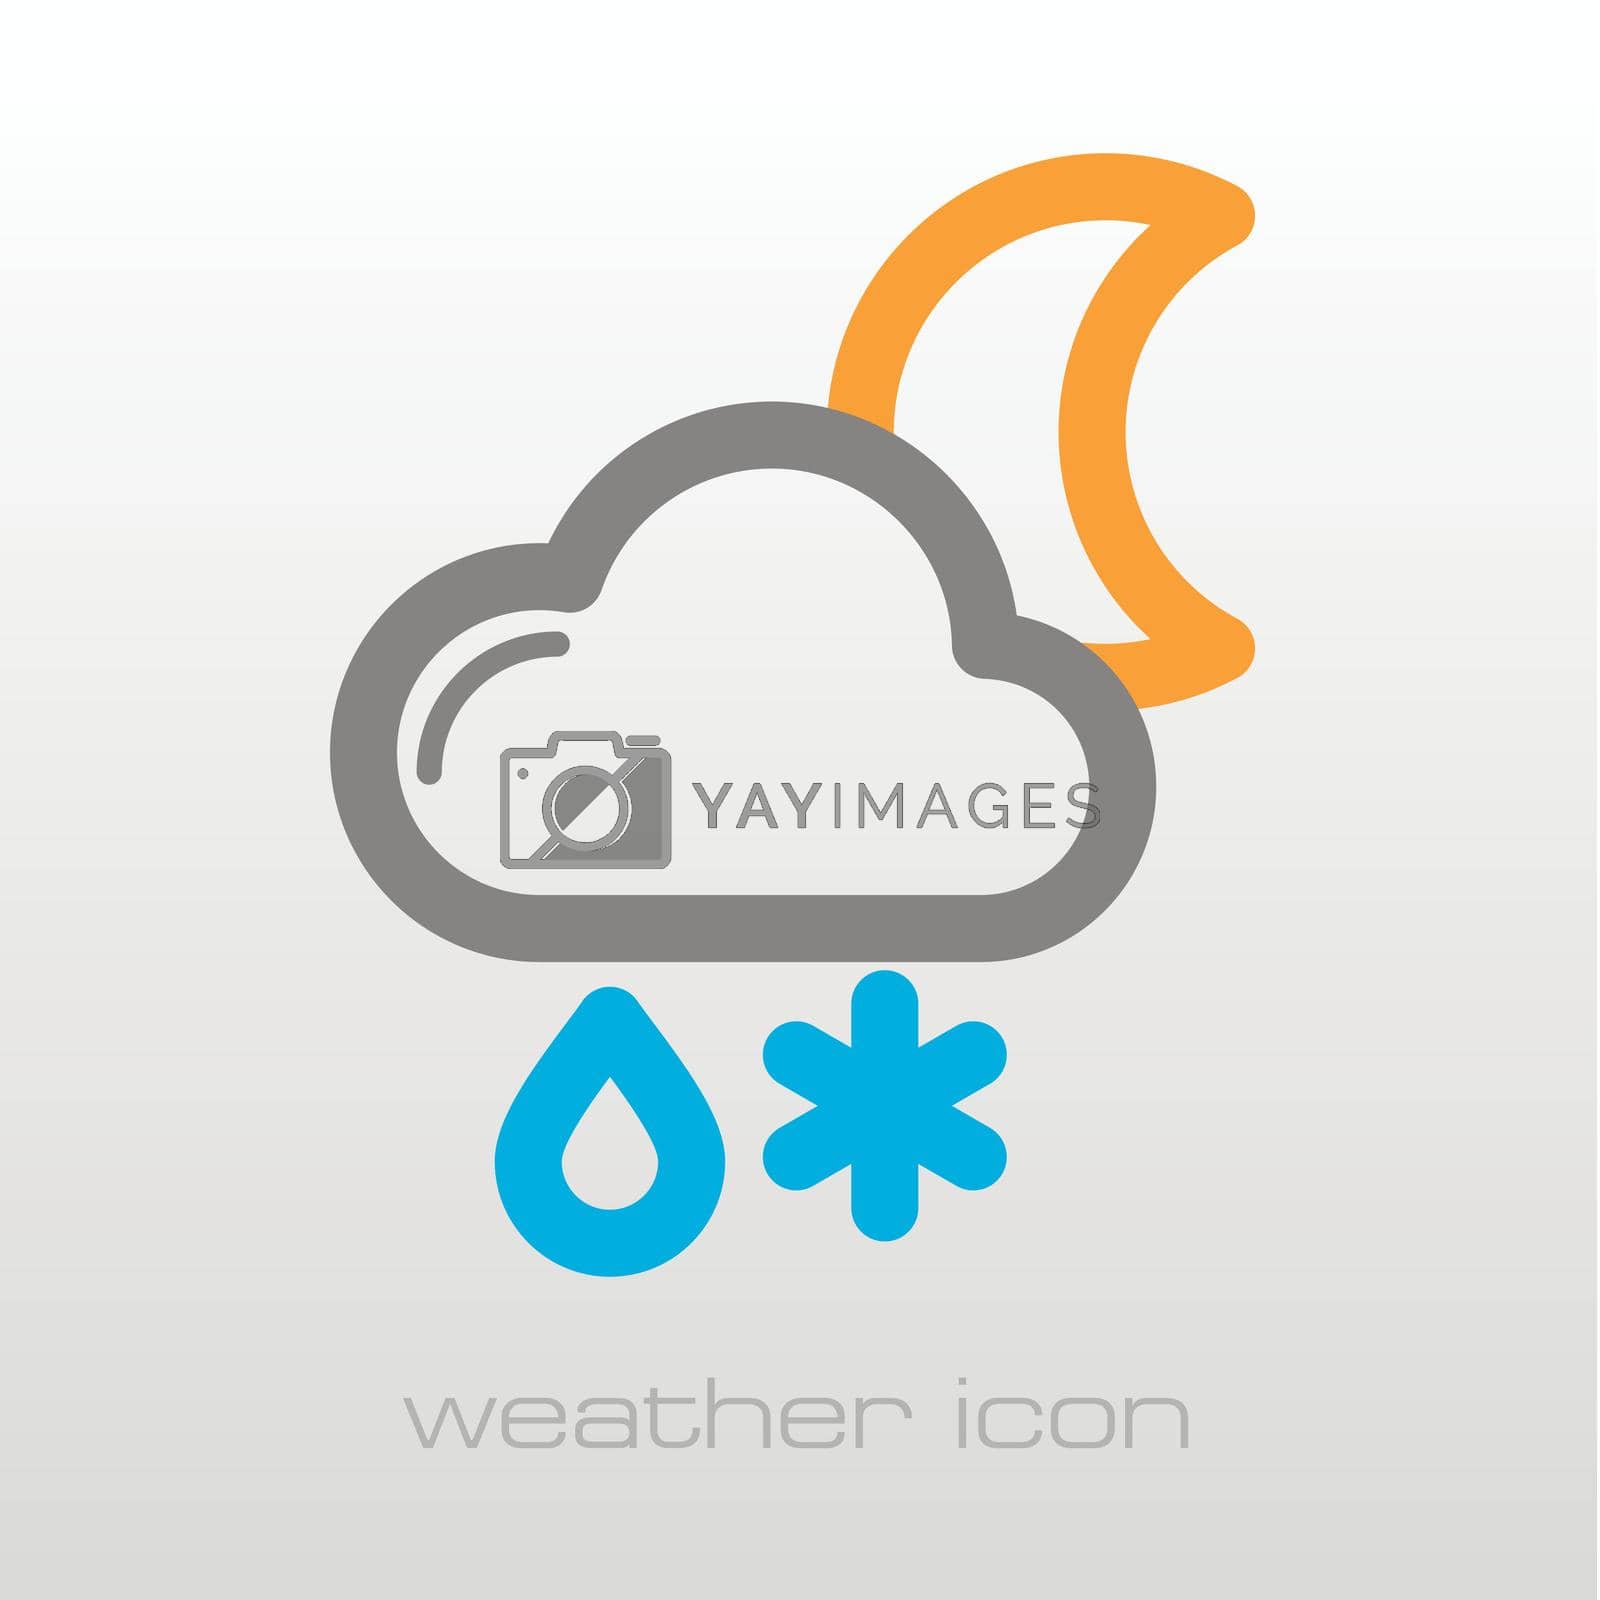 Cloud with Snow and Rain Moon outline icon. Sleep night dreams symbol. Meteorology. Weather. Vector illustration eps 10